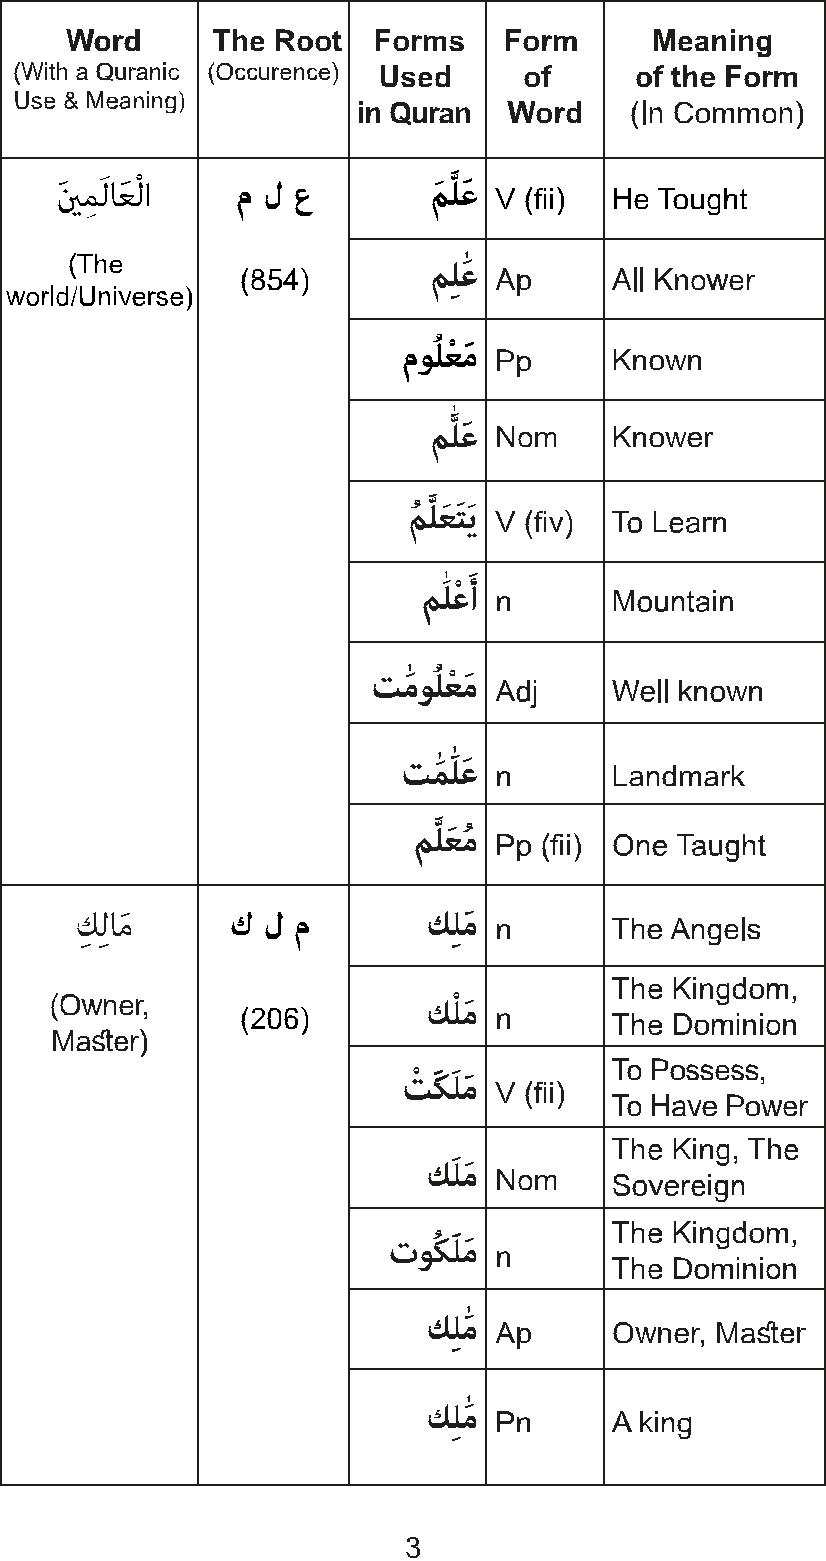 The Golden Words Dictionary of the Holy Quran - The Root Words and Their Forms - photo 5